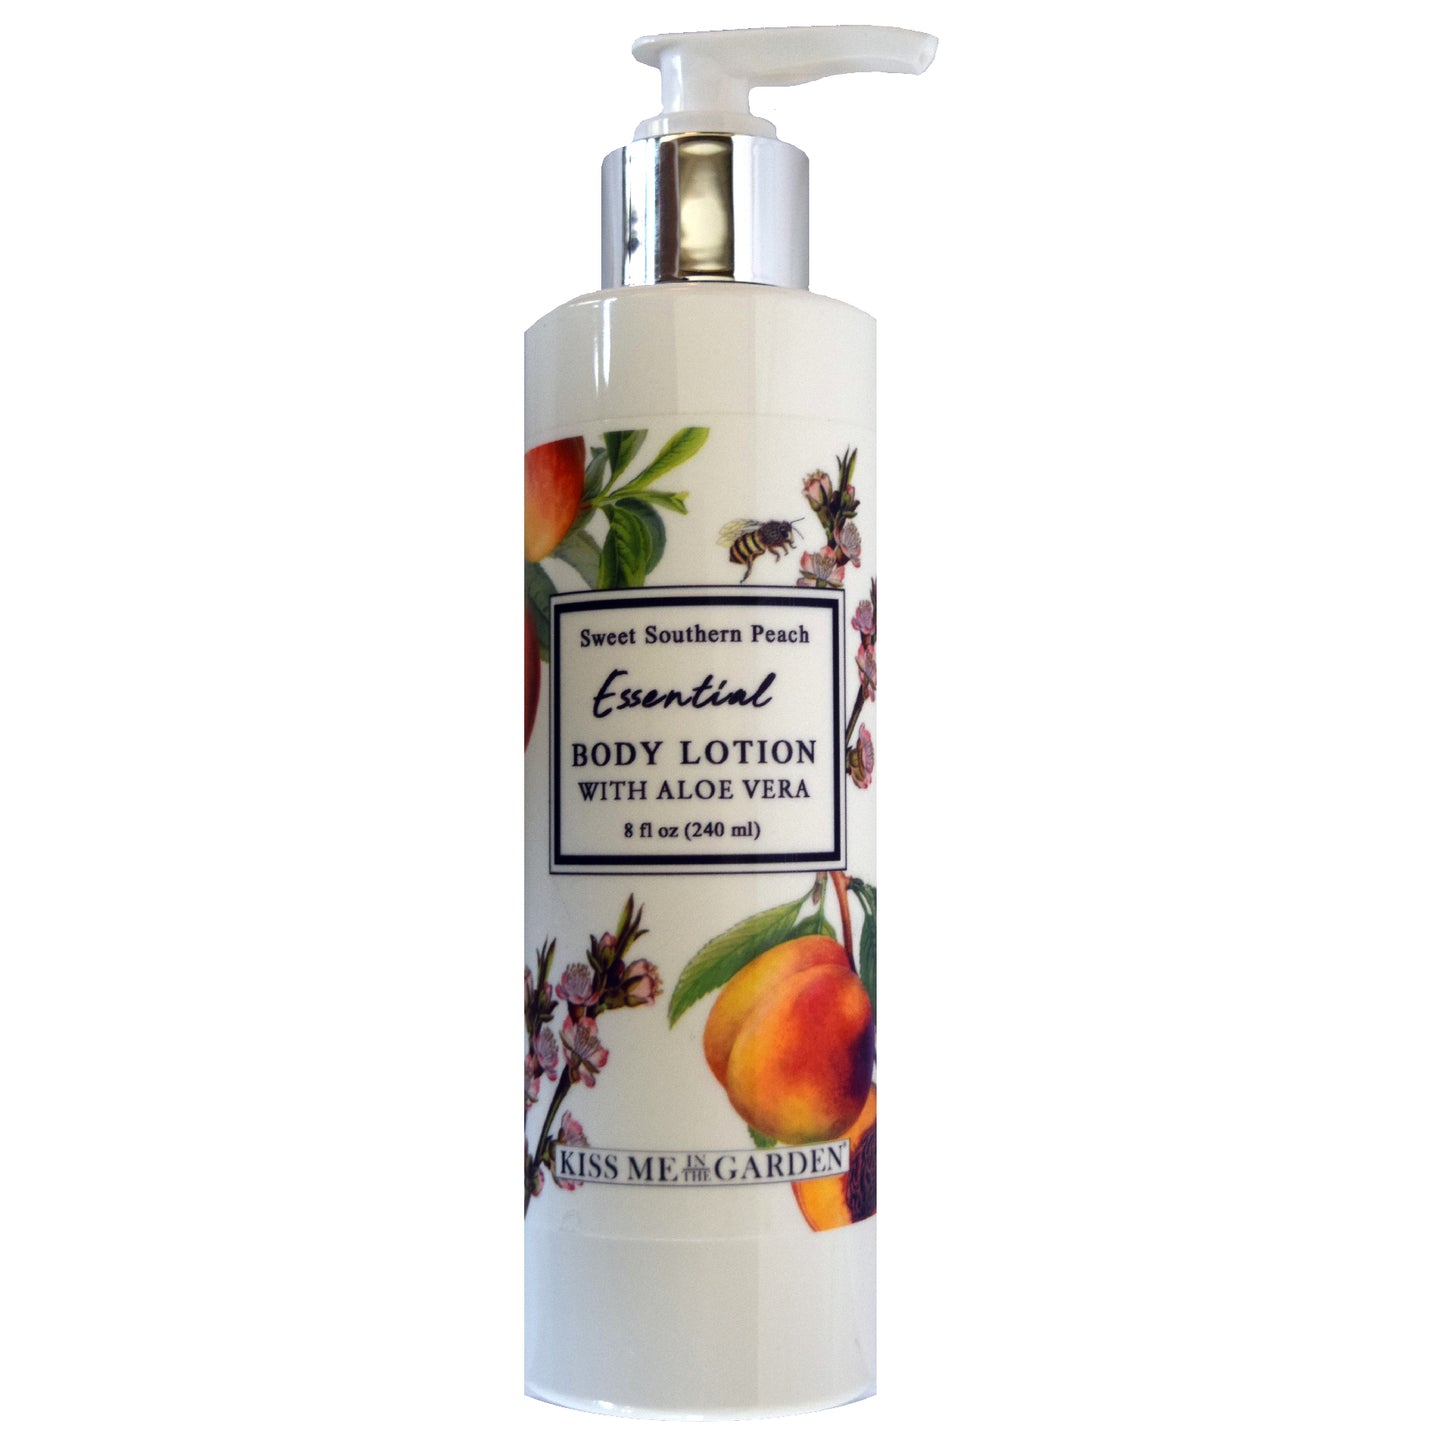 KISS ME IN THE GARDEN SWEET SOUTHERN PEACH BODY LOTION